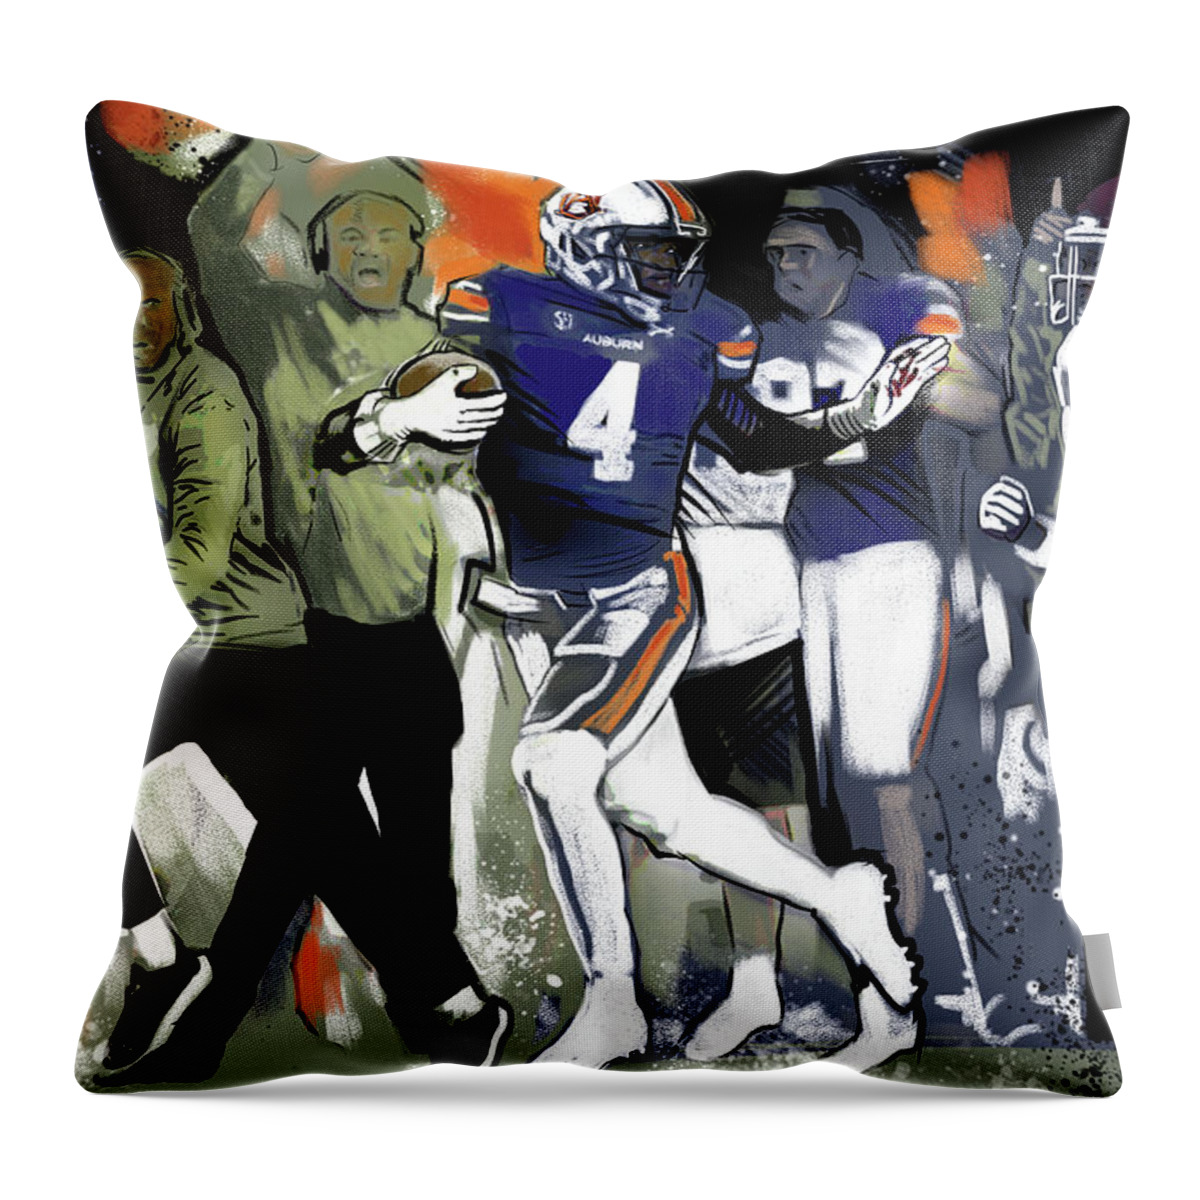  Throw Pillow featuring the painting Bo Knows #1 by John Gholson